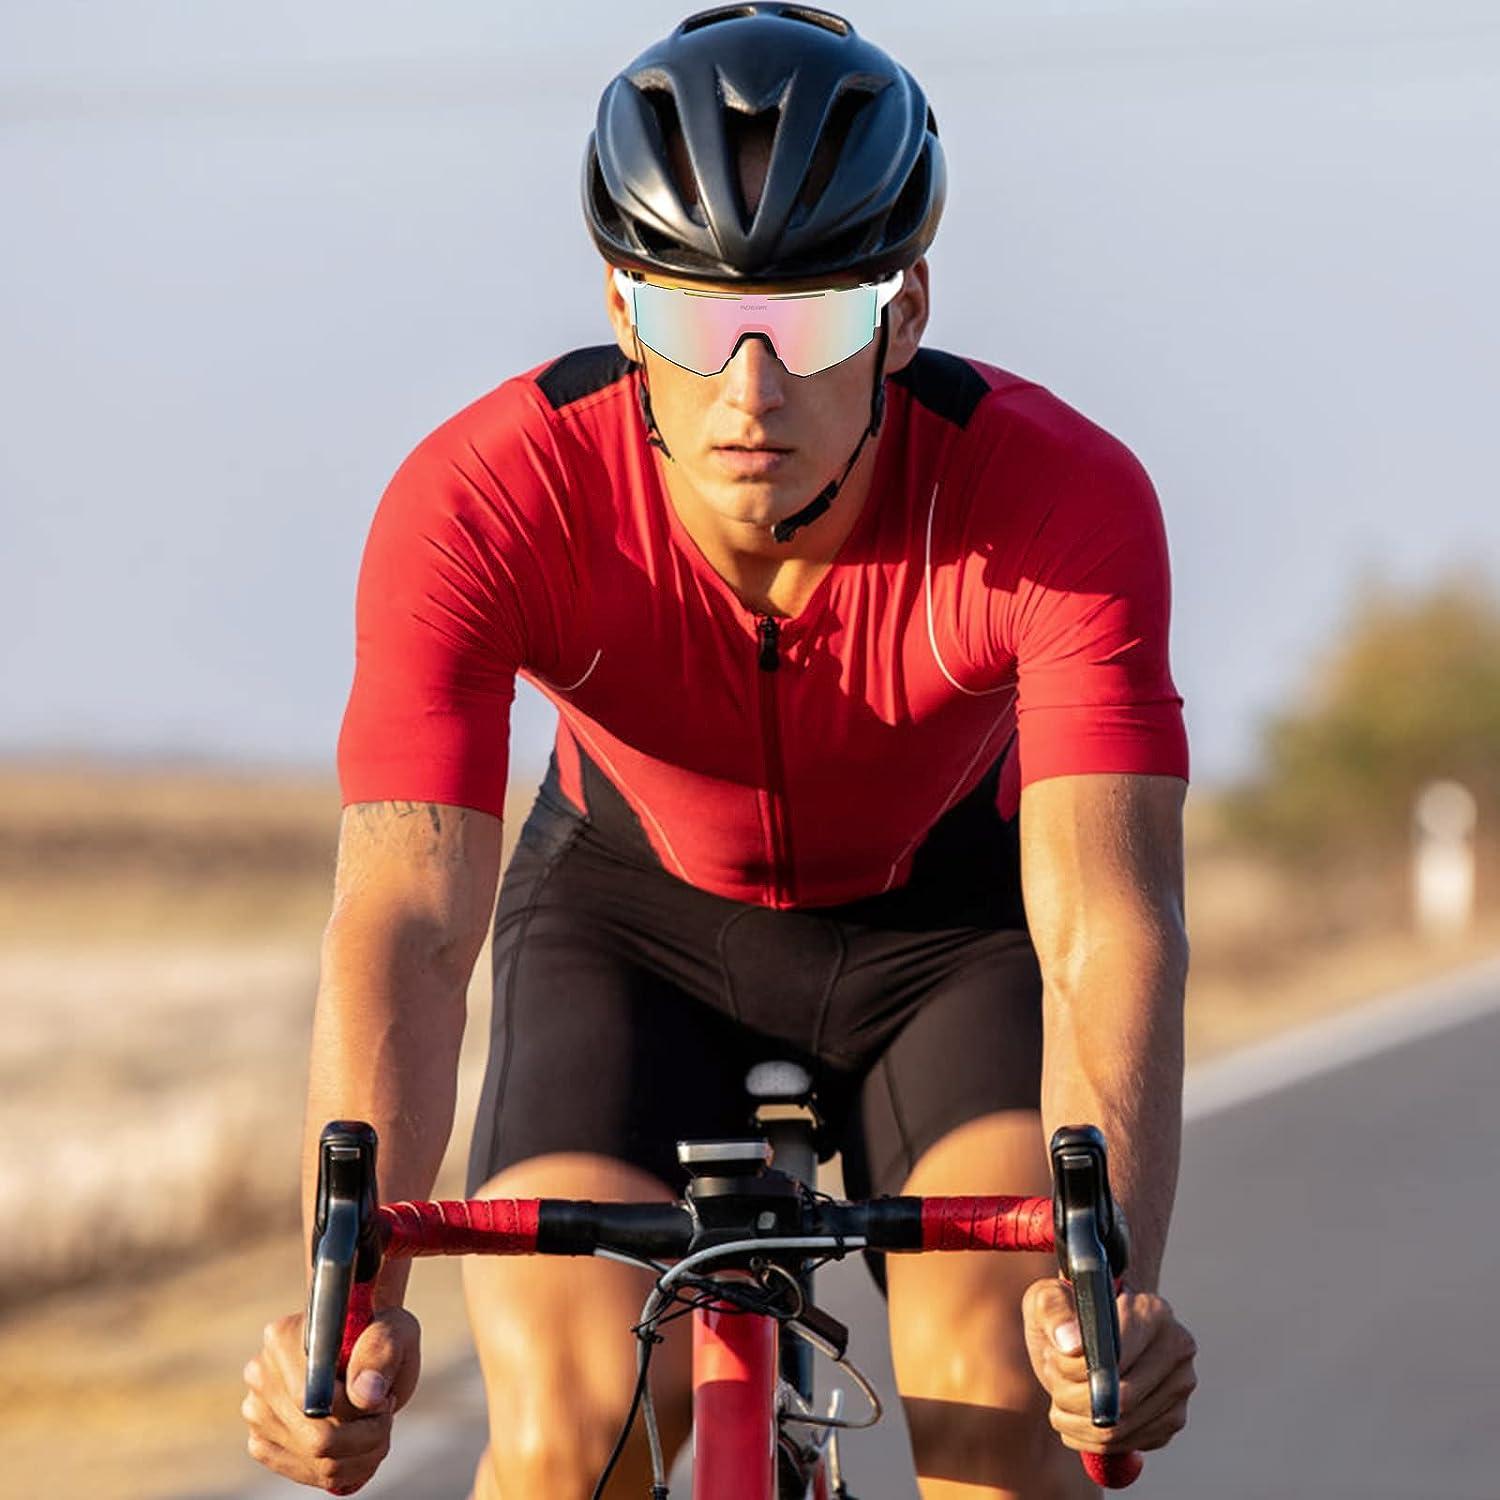 How To Choose Your Cycling Or Running Sunglasses?